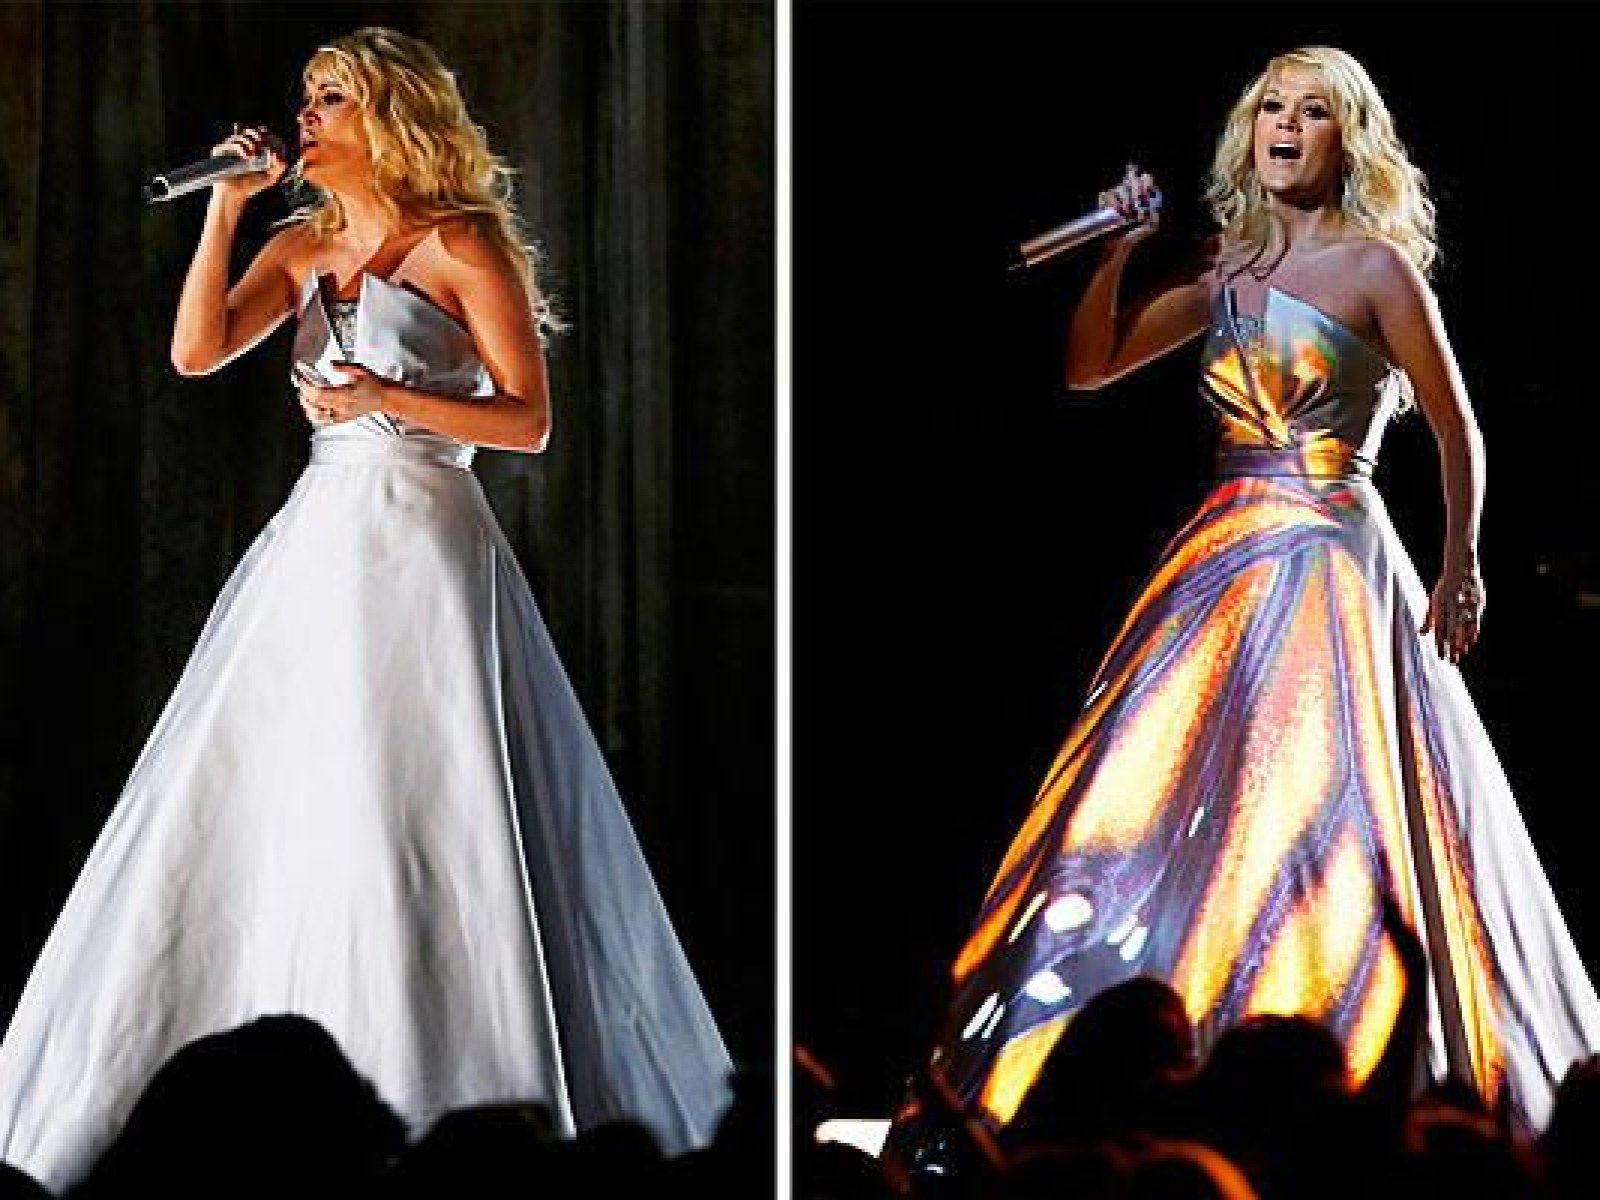 Carrie Underwood Grammys Dress Highlights Fusion Of Fashion And